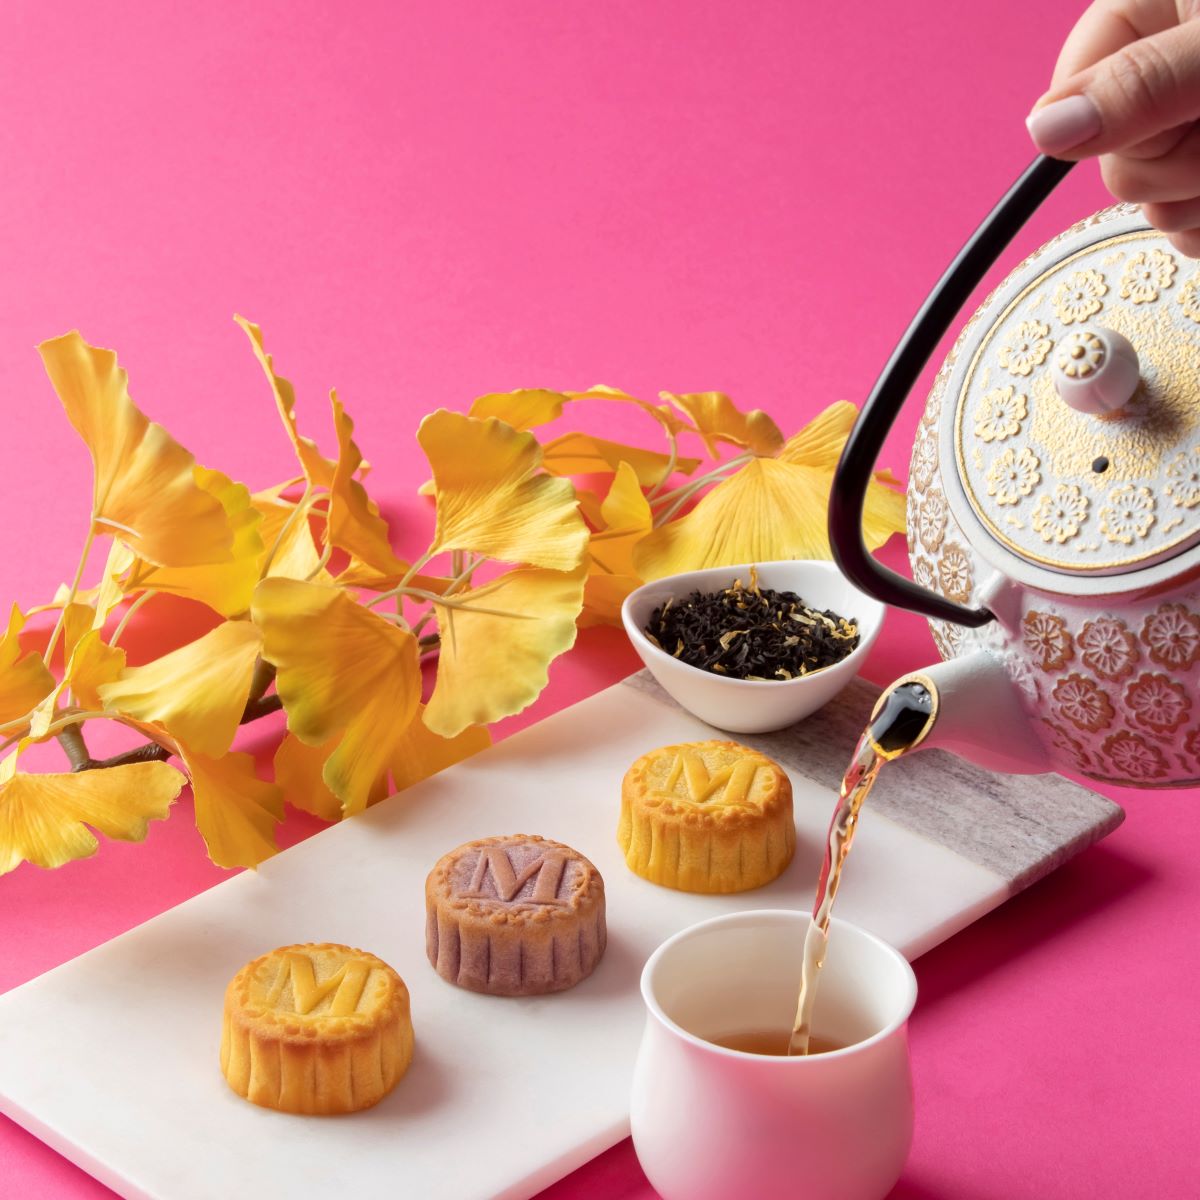 Pick Your Favourite From Our 2022 Gourmet Mooncake Curation